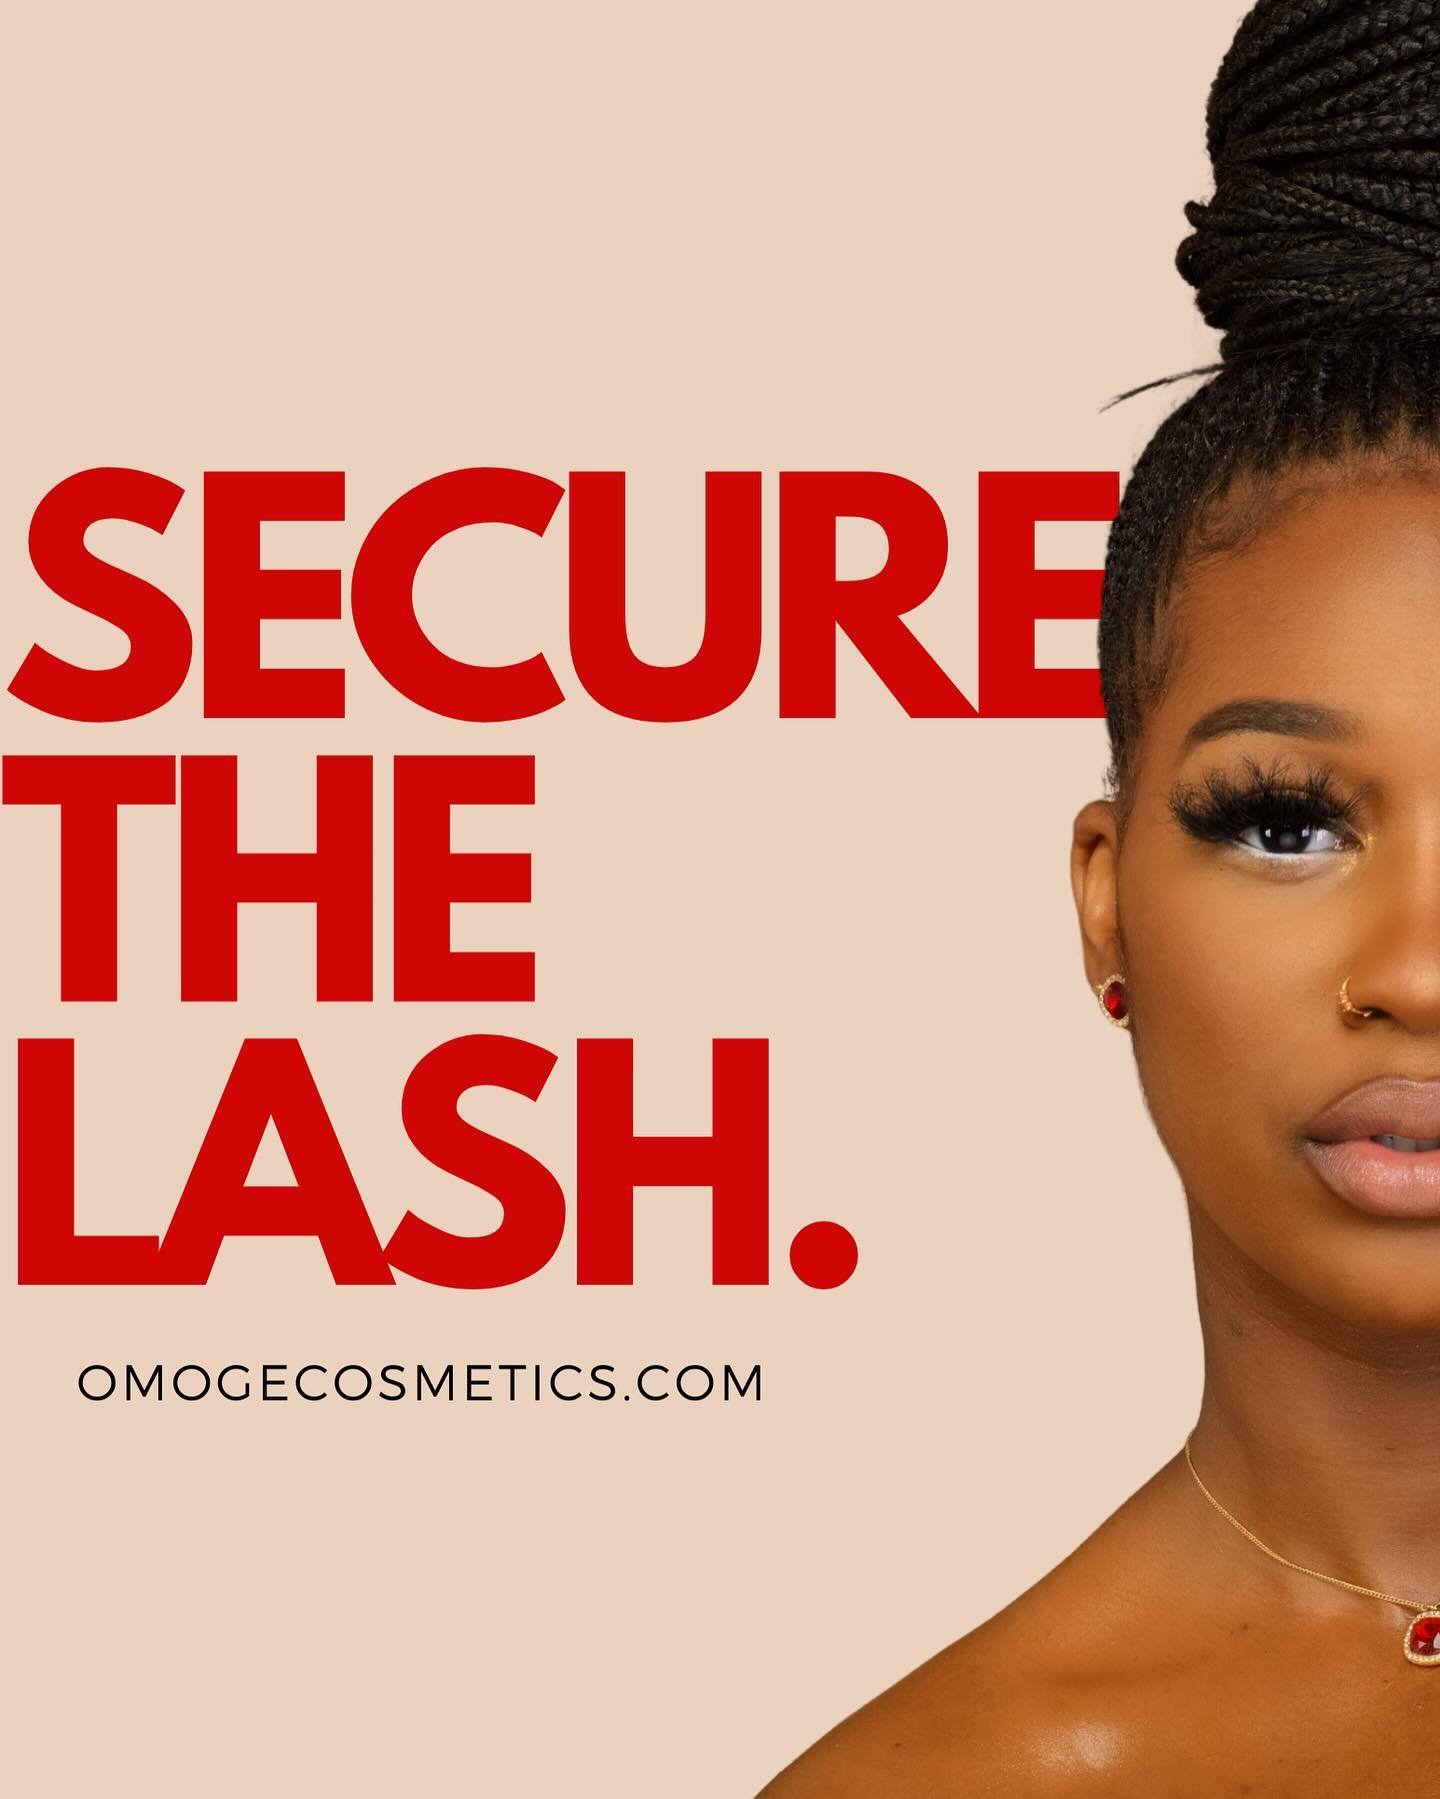 SECURE THE LASH 🔒

Y&rsquo;all asked for Omoge Lashes &amp; we listened. Preorder the exact styles and amounts you want before we do a limited restock. Limited as L I M I T E D. 

For one week, April 20th-27th you can preorder every lash you want. A